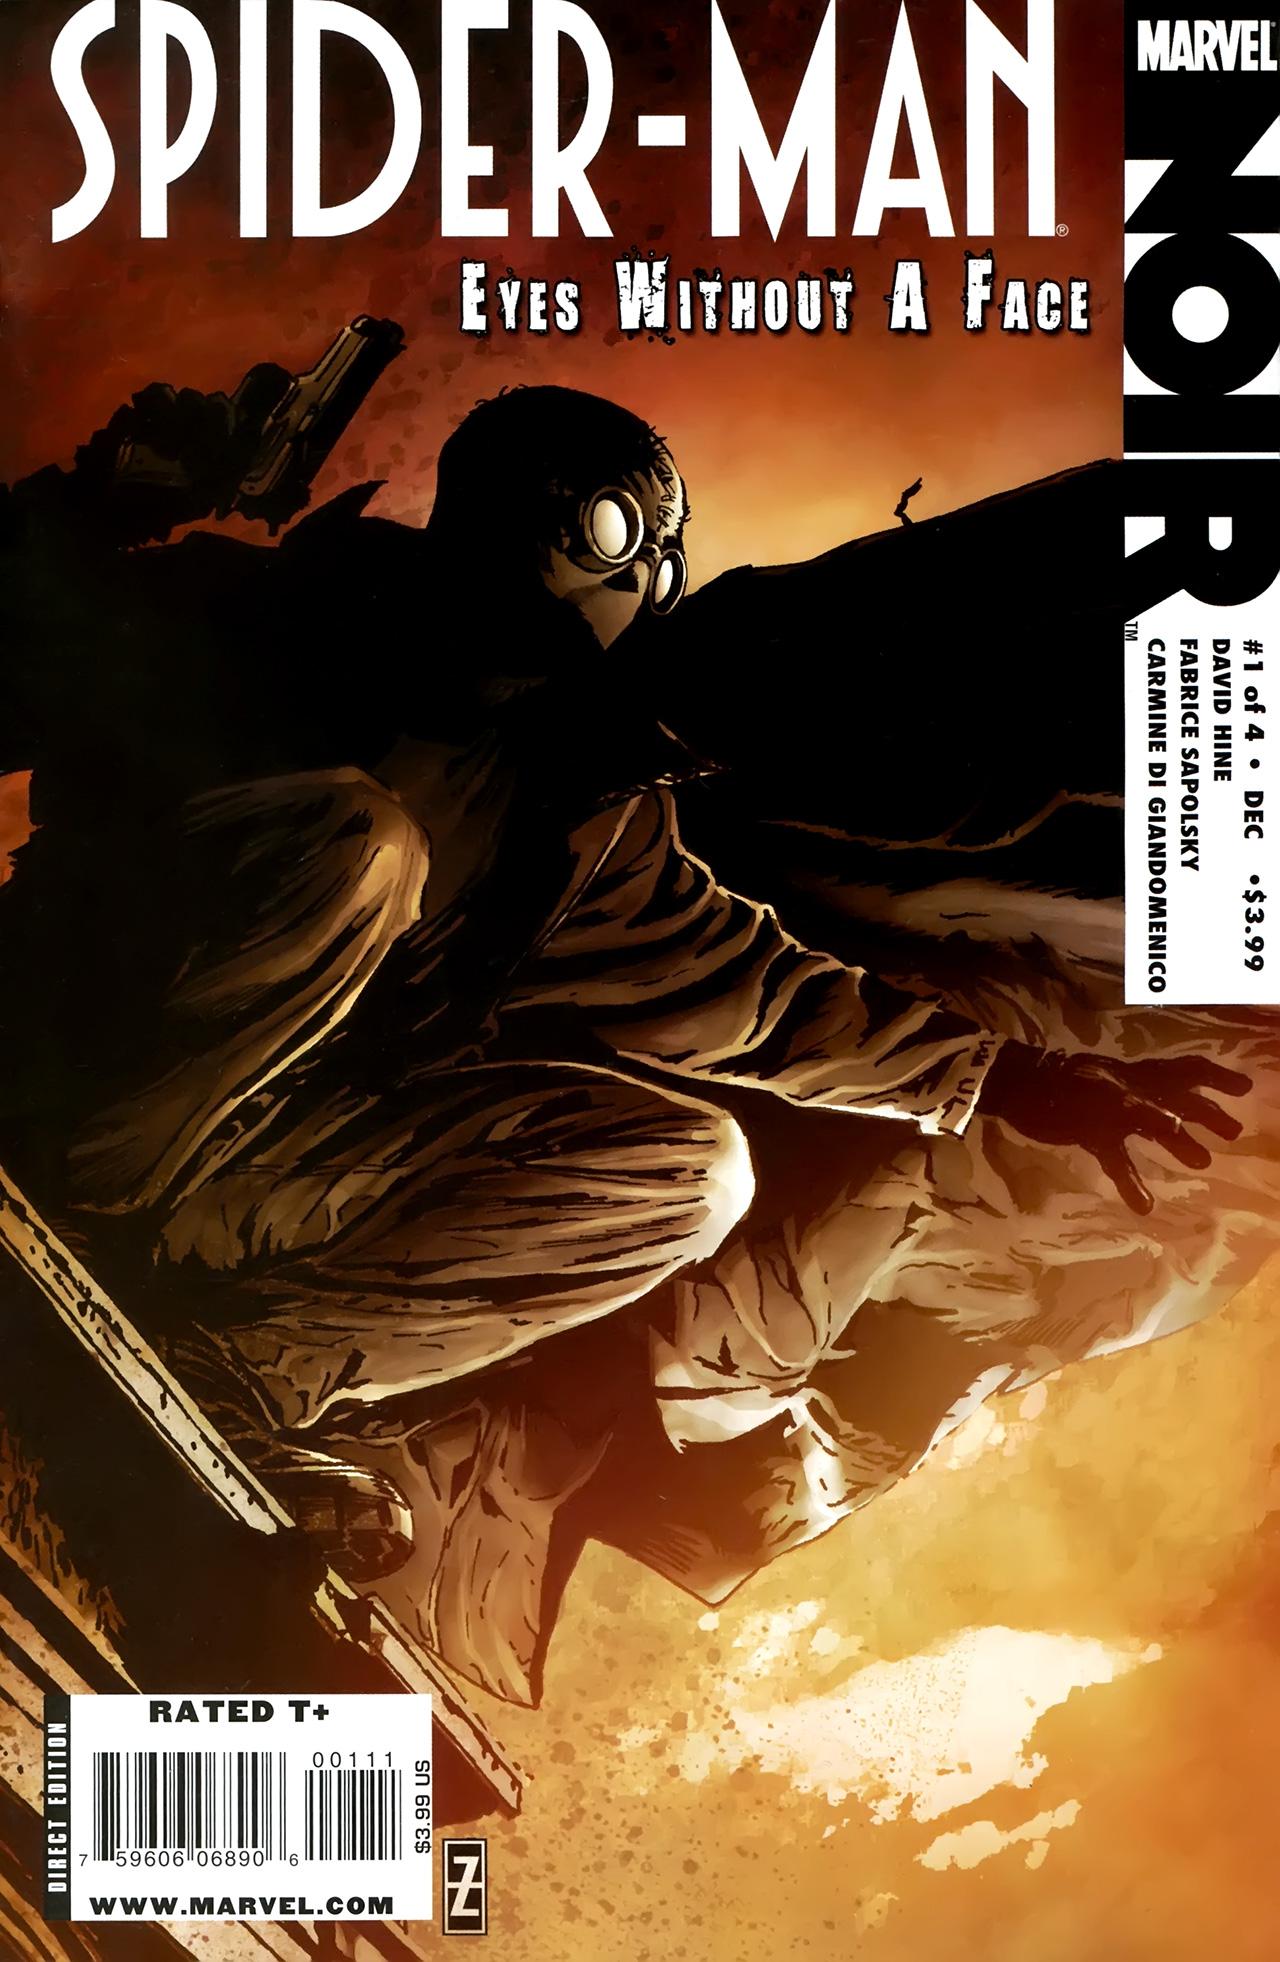 Spider-Man Noir: Eyes Without A Face Vol. 1 #1